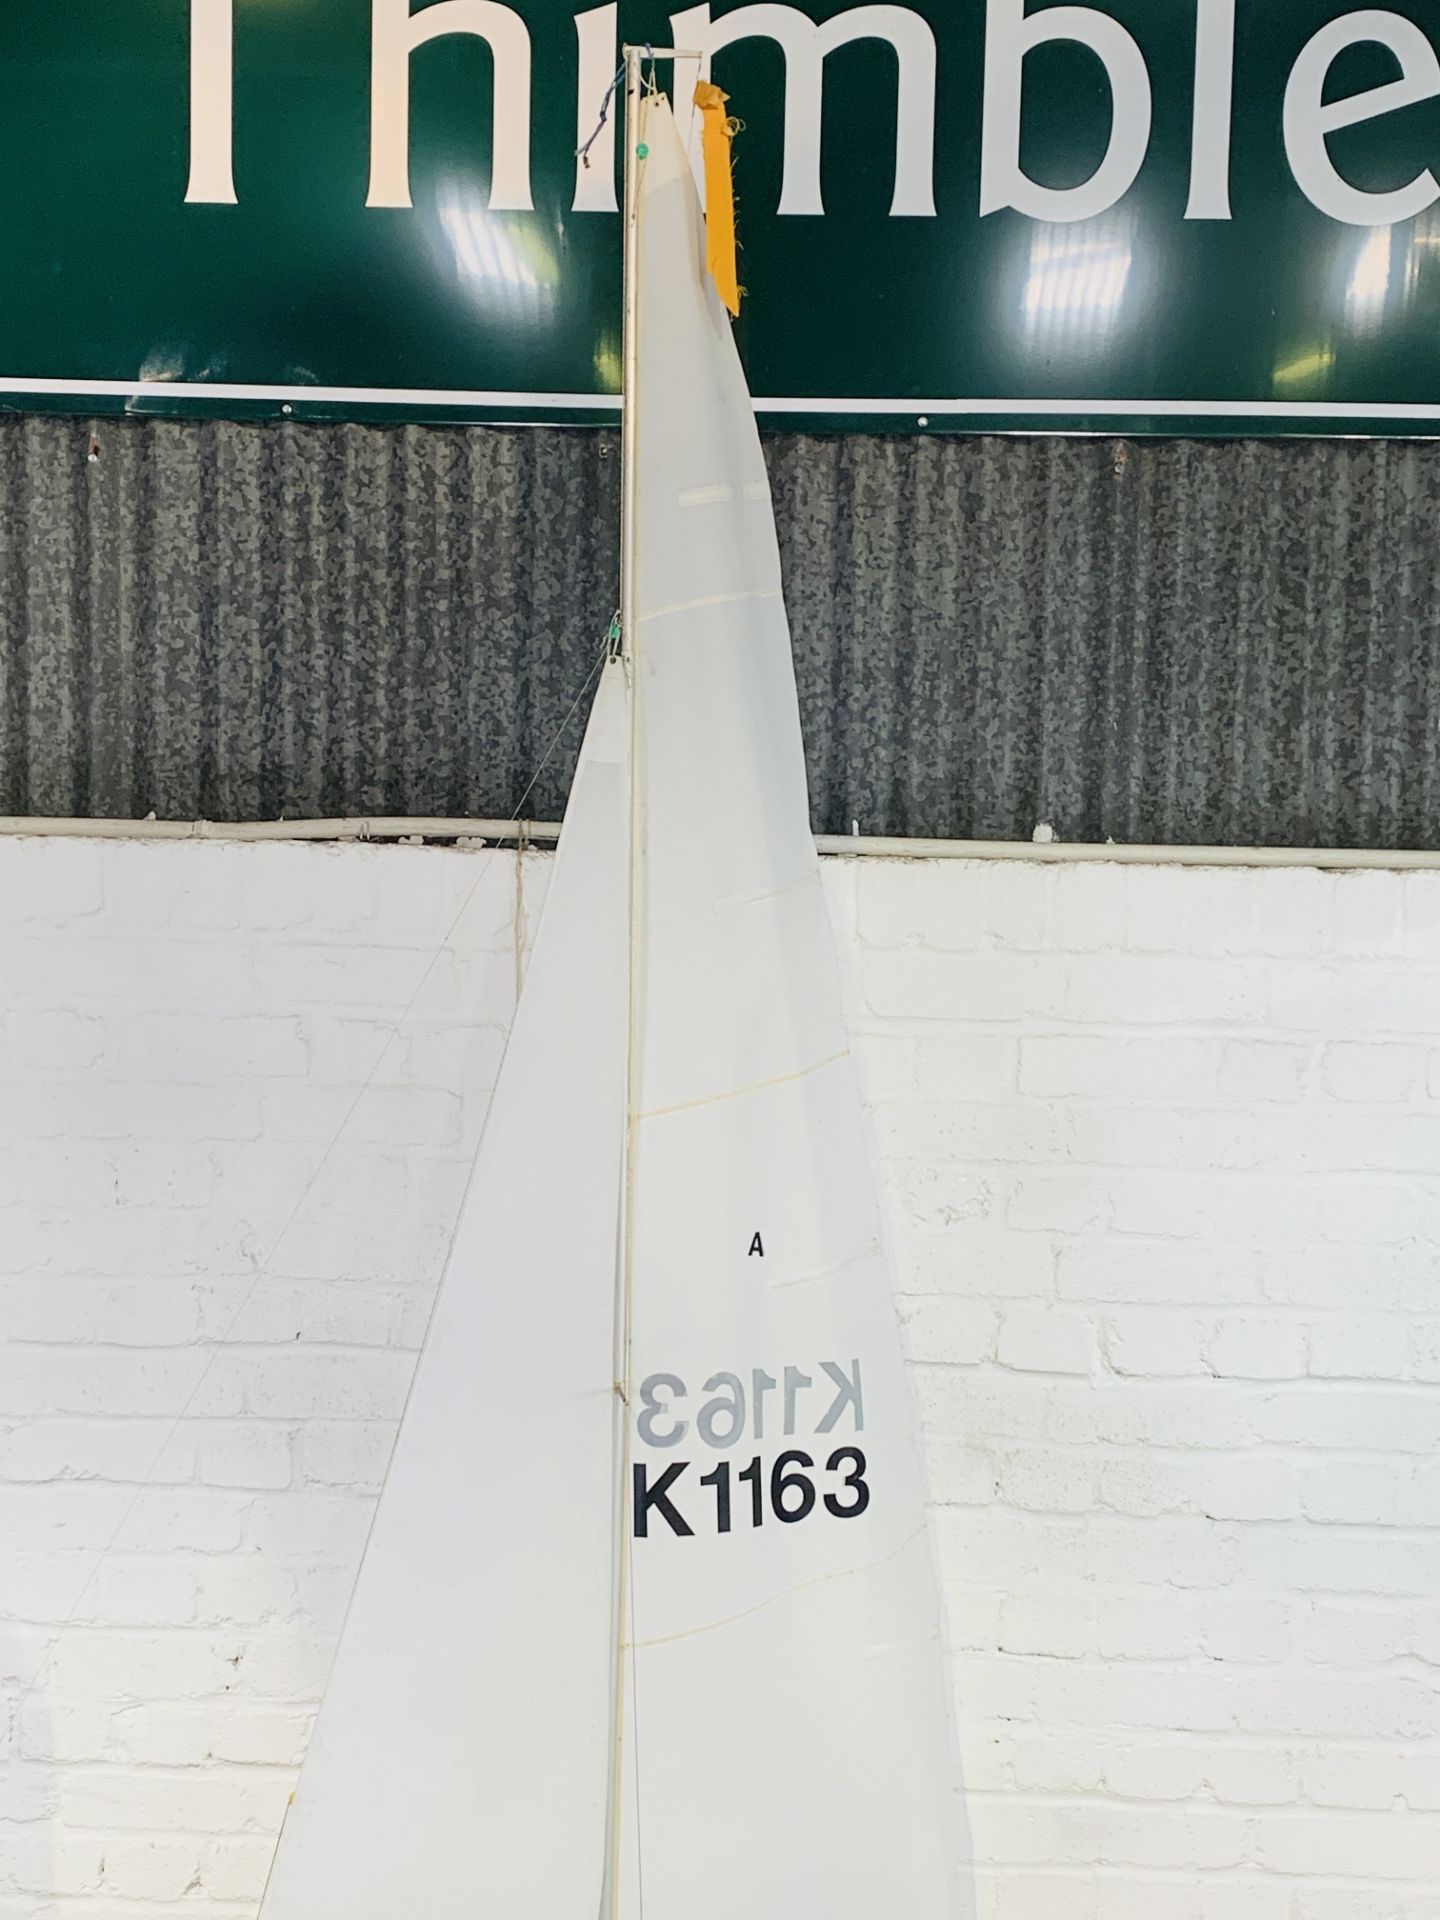 Bartleby A class model racing yacht - Image 4 of 5